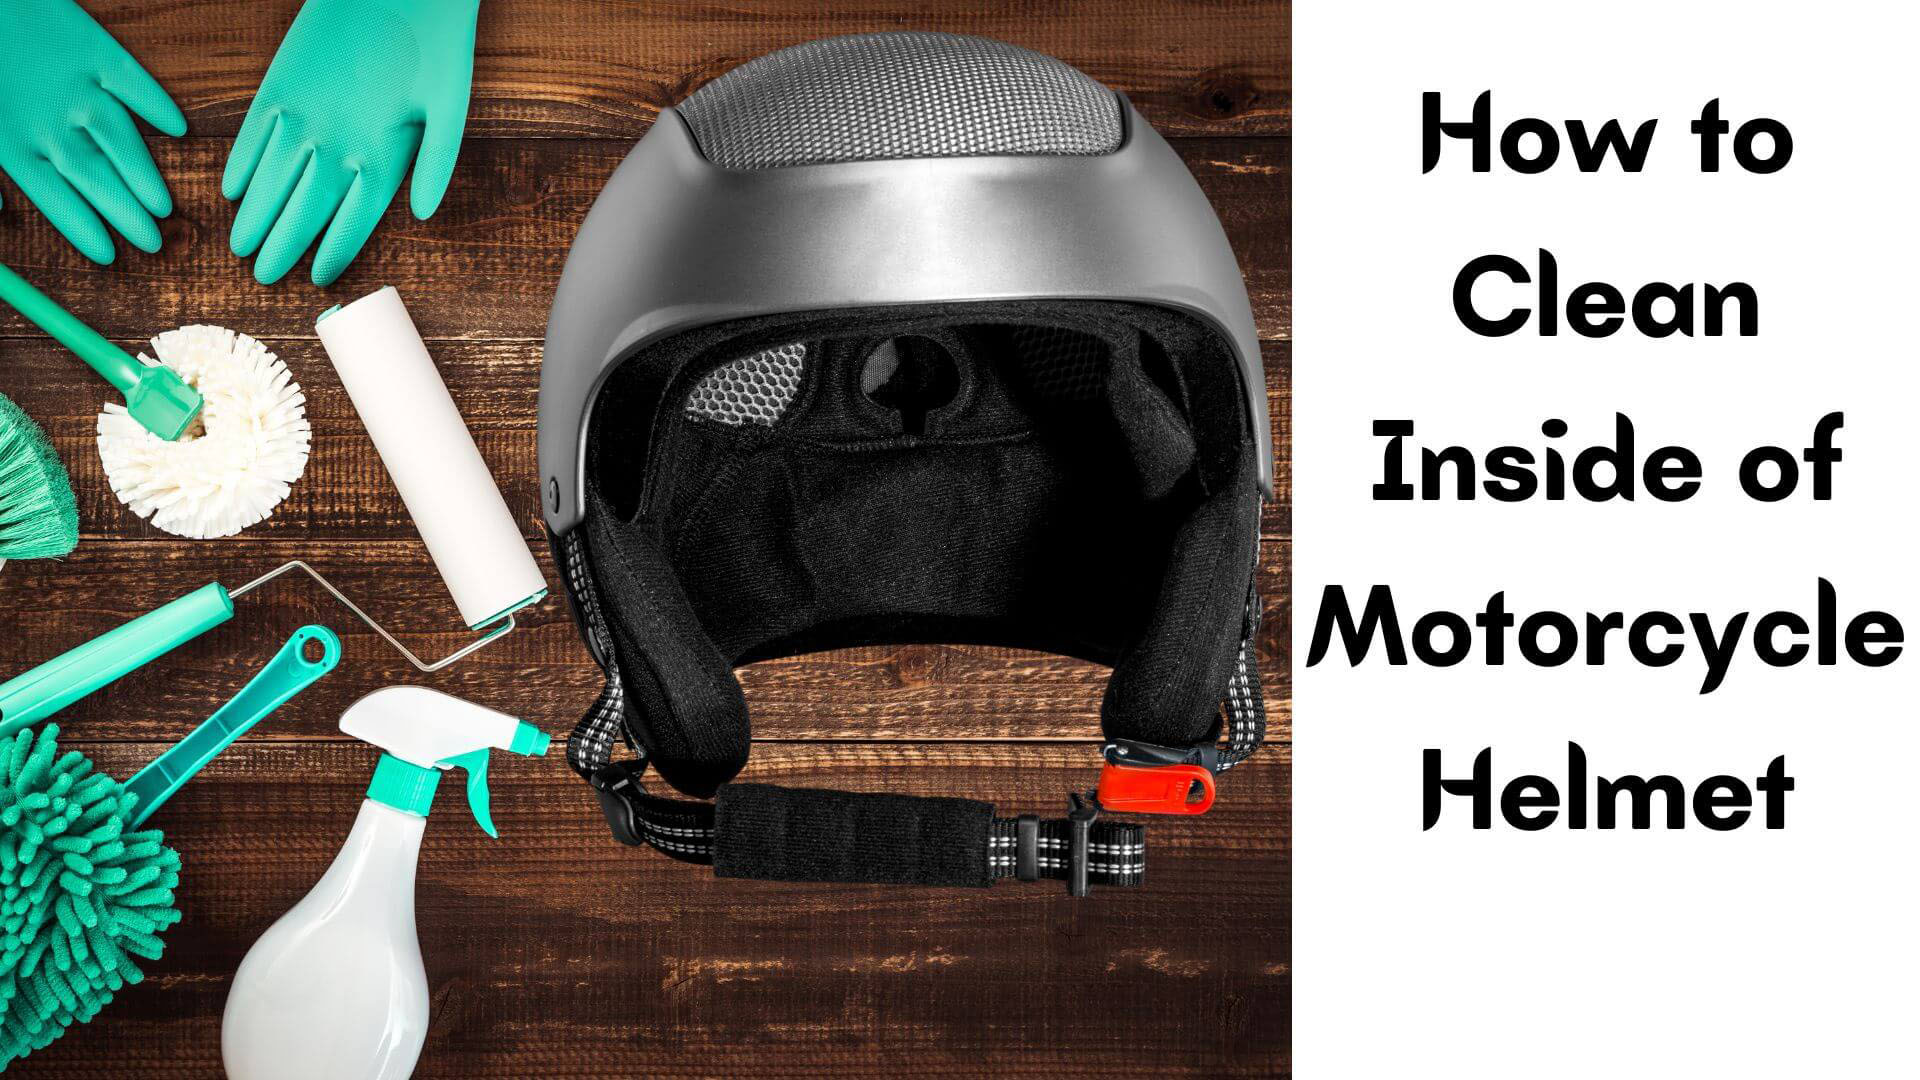 How to Clean Inside of Motorcycle Helmet? Like a Pro!